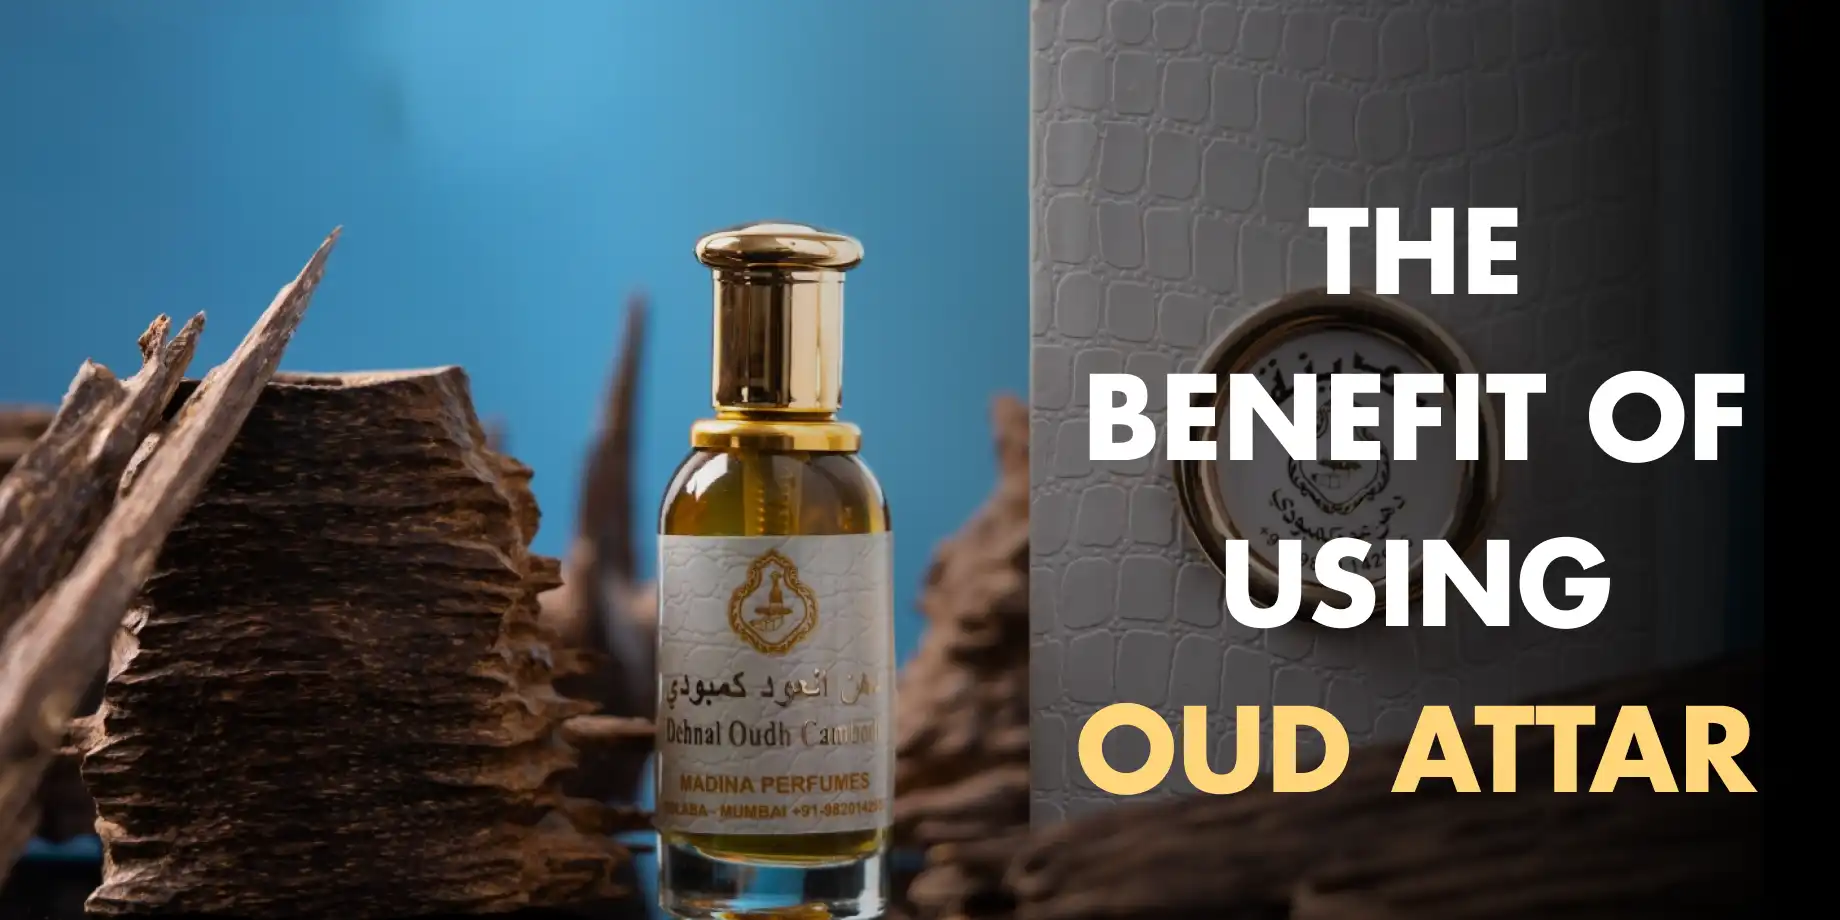 The benefit of using oud attar